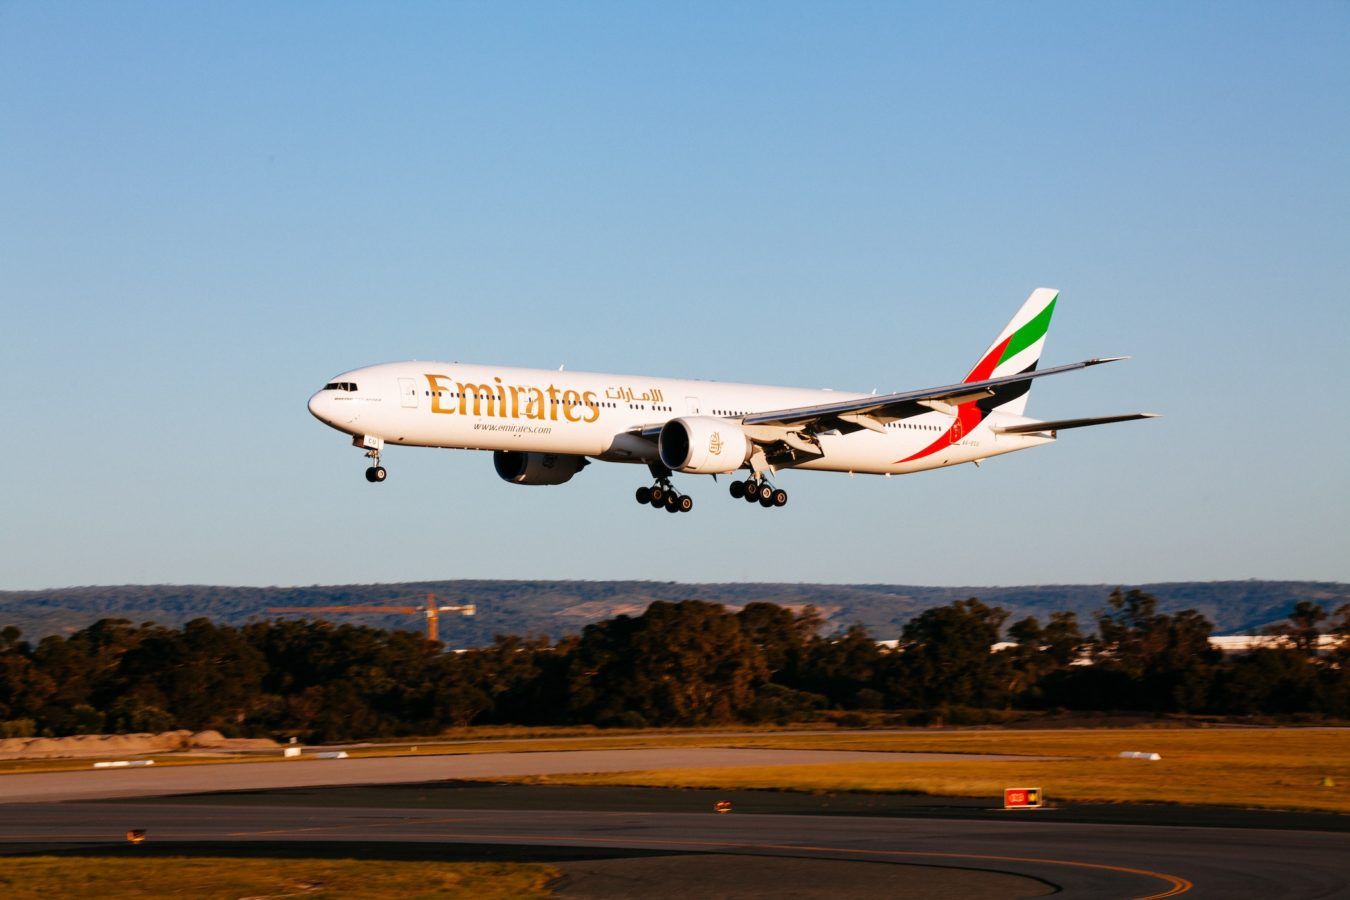 Emirates joins the metaverse with Bitcoin payments and NFTs on company websites